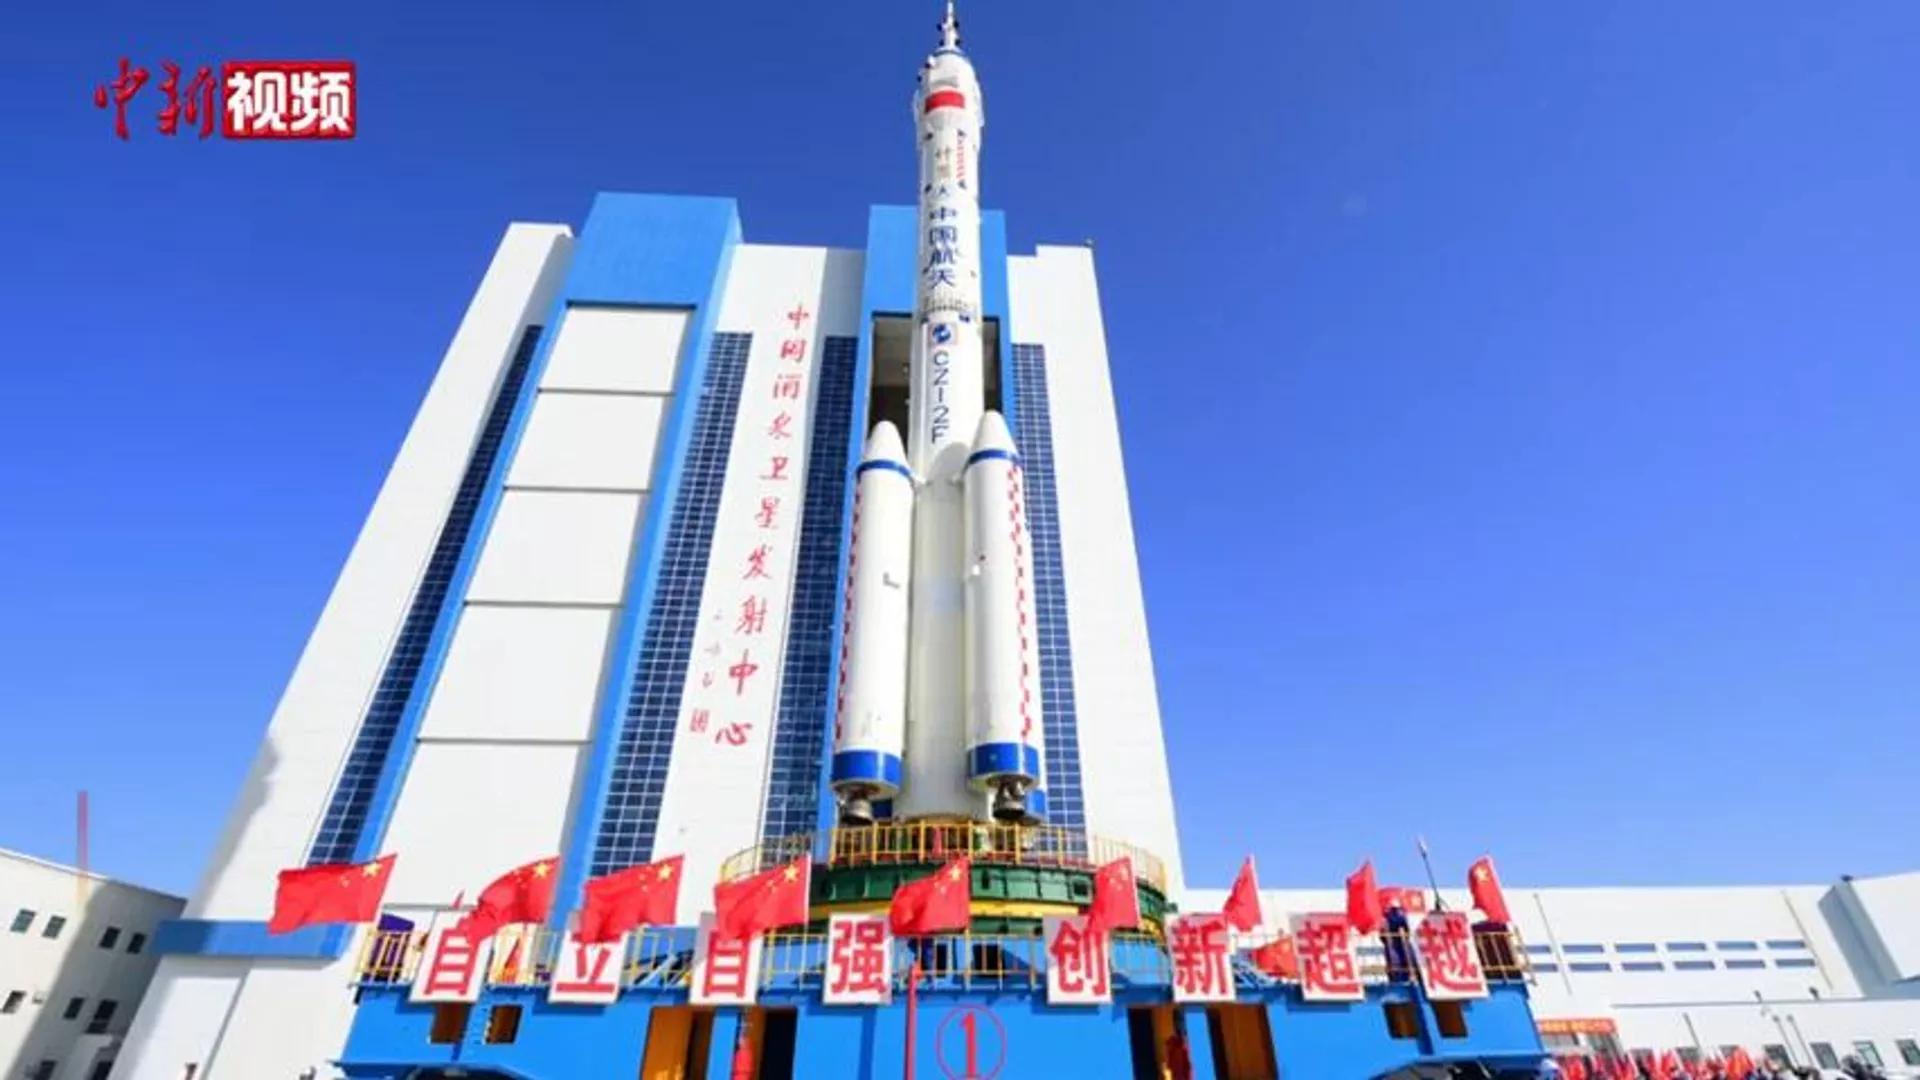 China to Launch Shenzhou-16 Space Mission to Orbital Station on May 30 - Space Agency